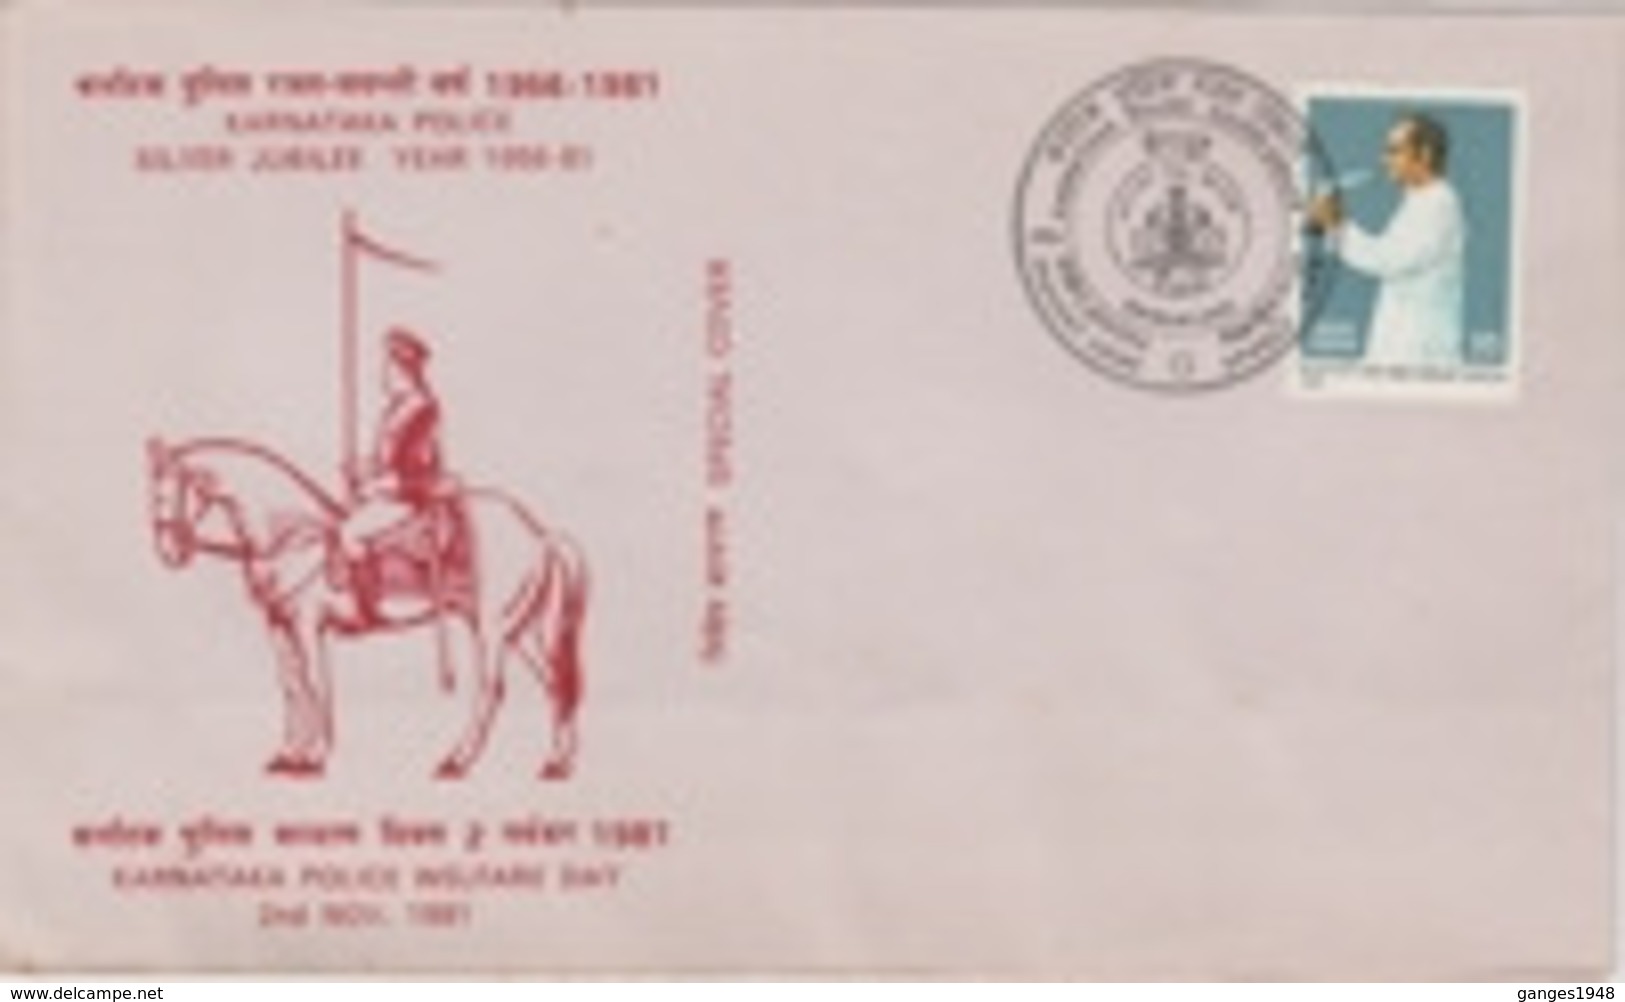 India  1981  Karnataka Police  Silver Jubilee Year  Bangalore  Special Cover  # 21898  D Inde - Polizei - Gendarmerie